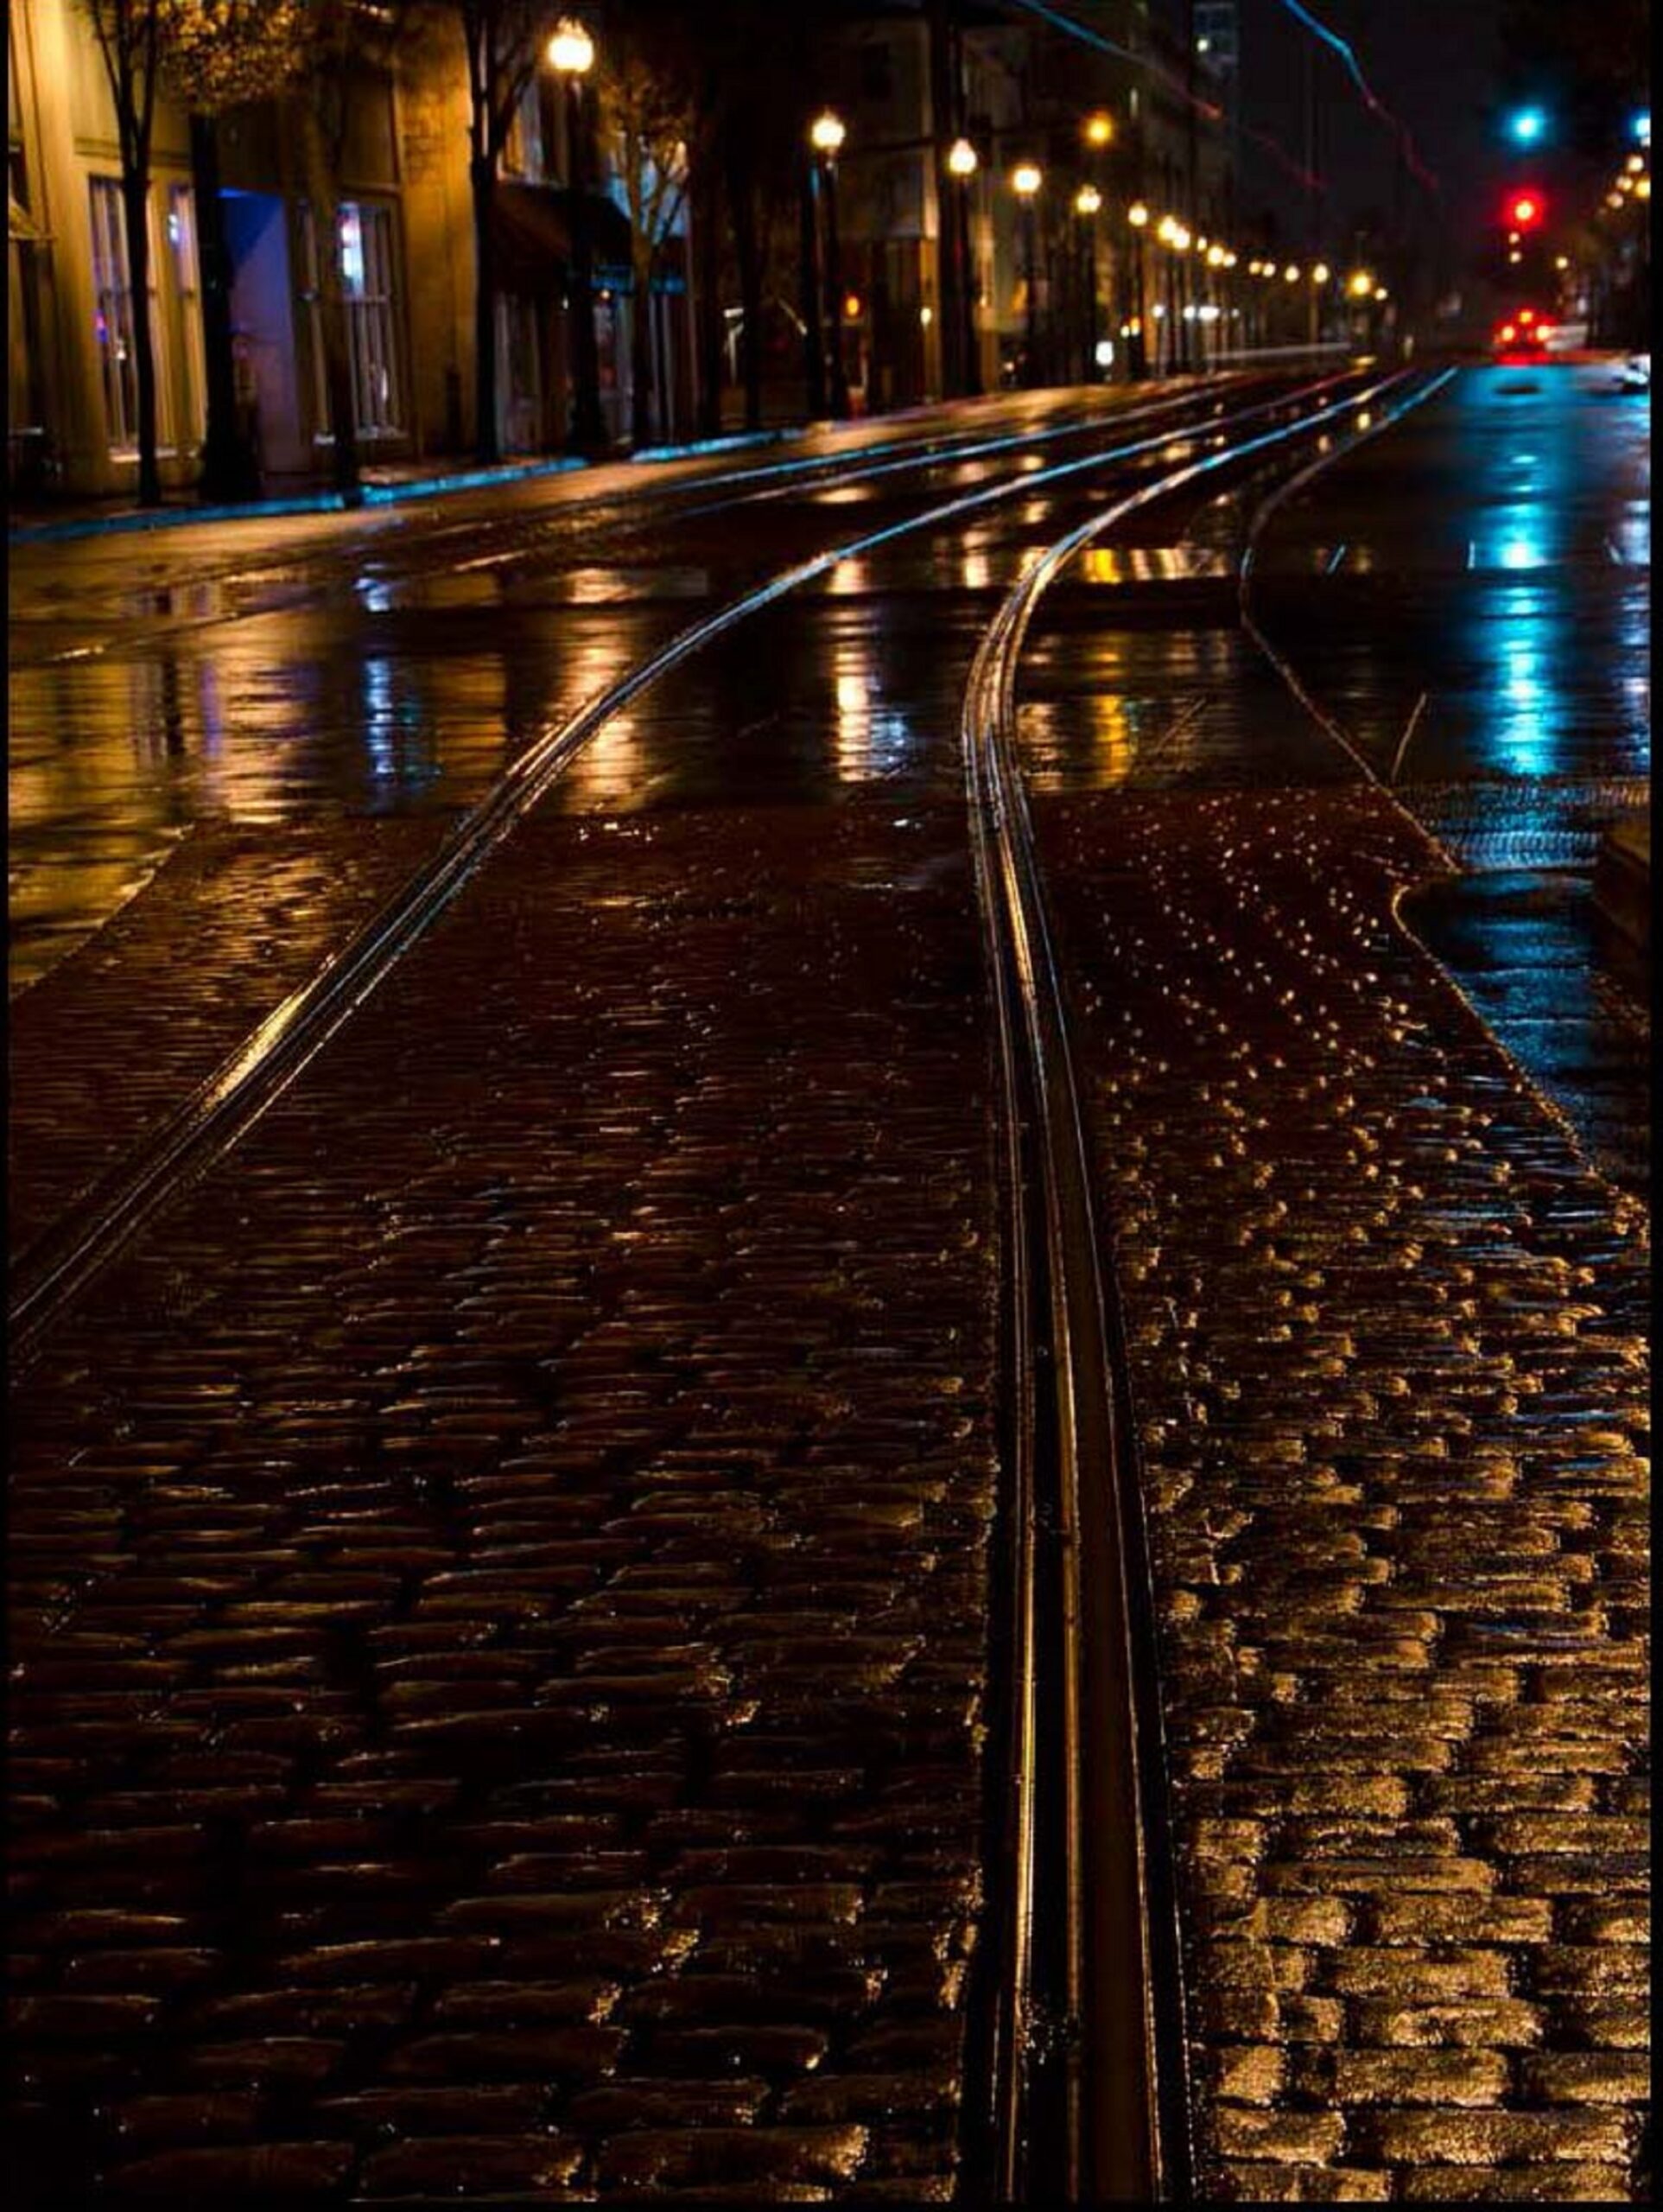 Photograph depicting a night view of the light rail tracks found on 3rd and Washington in downtown Hillsboro.